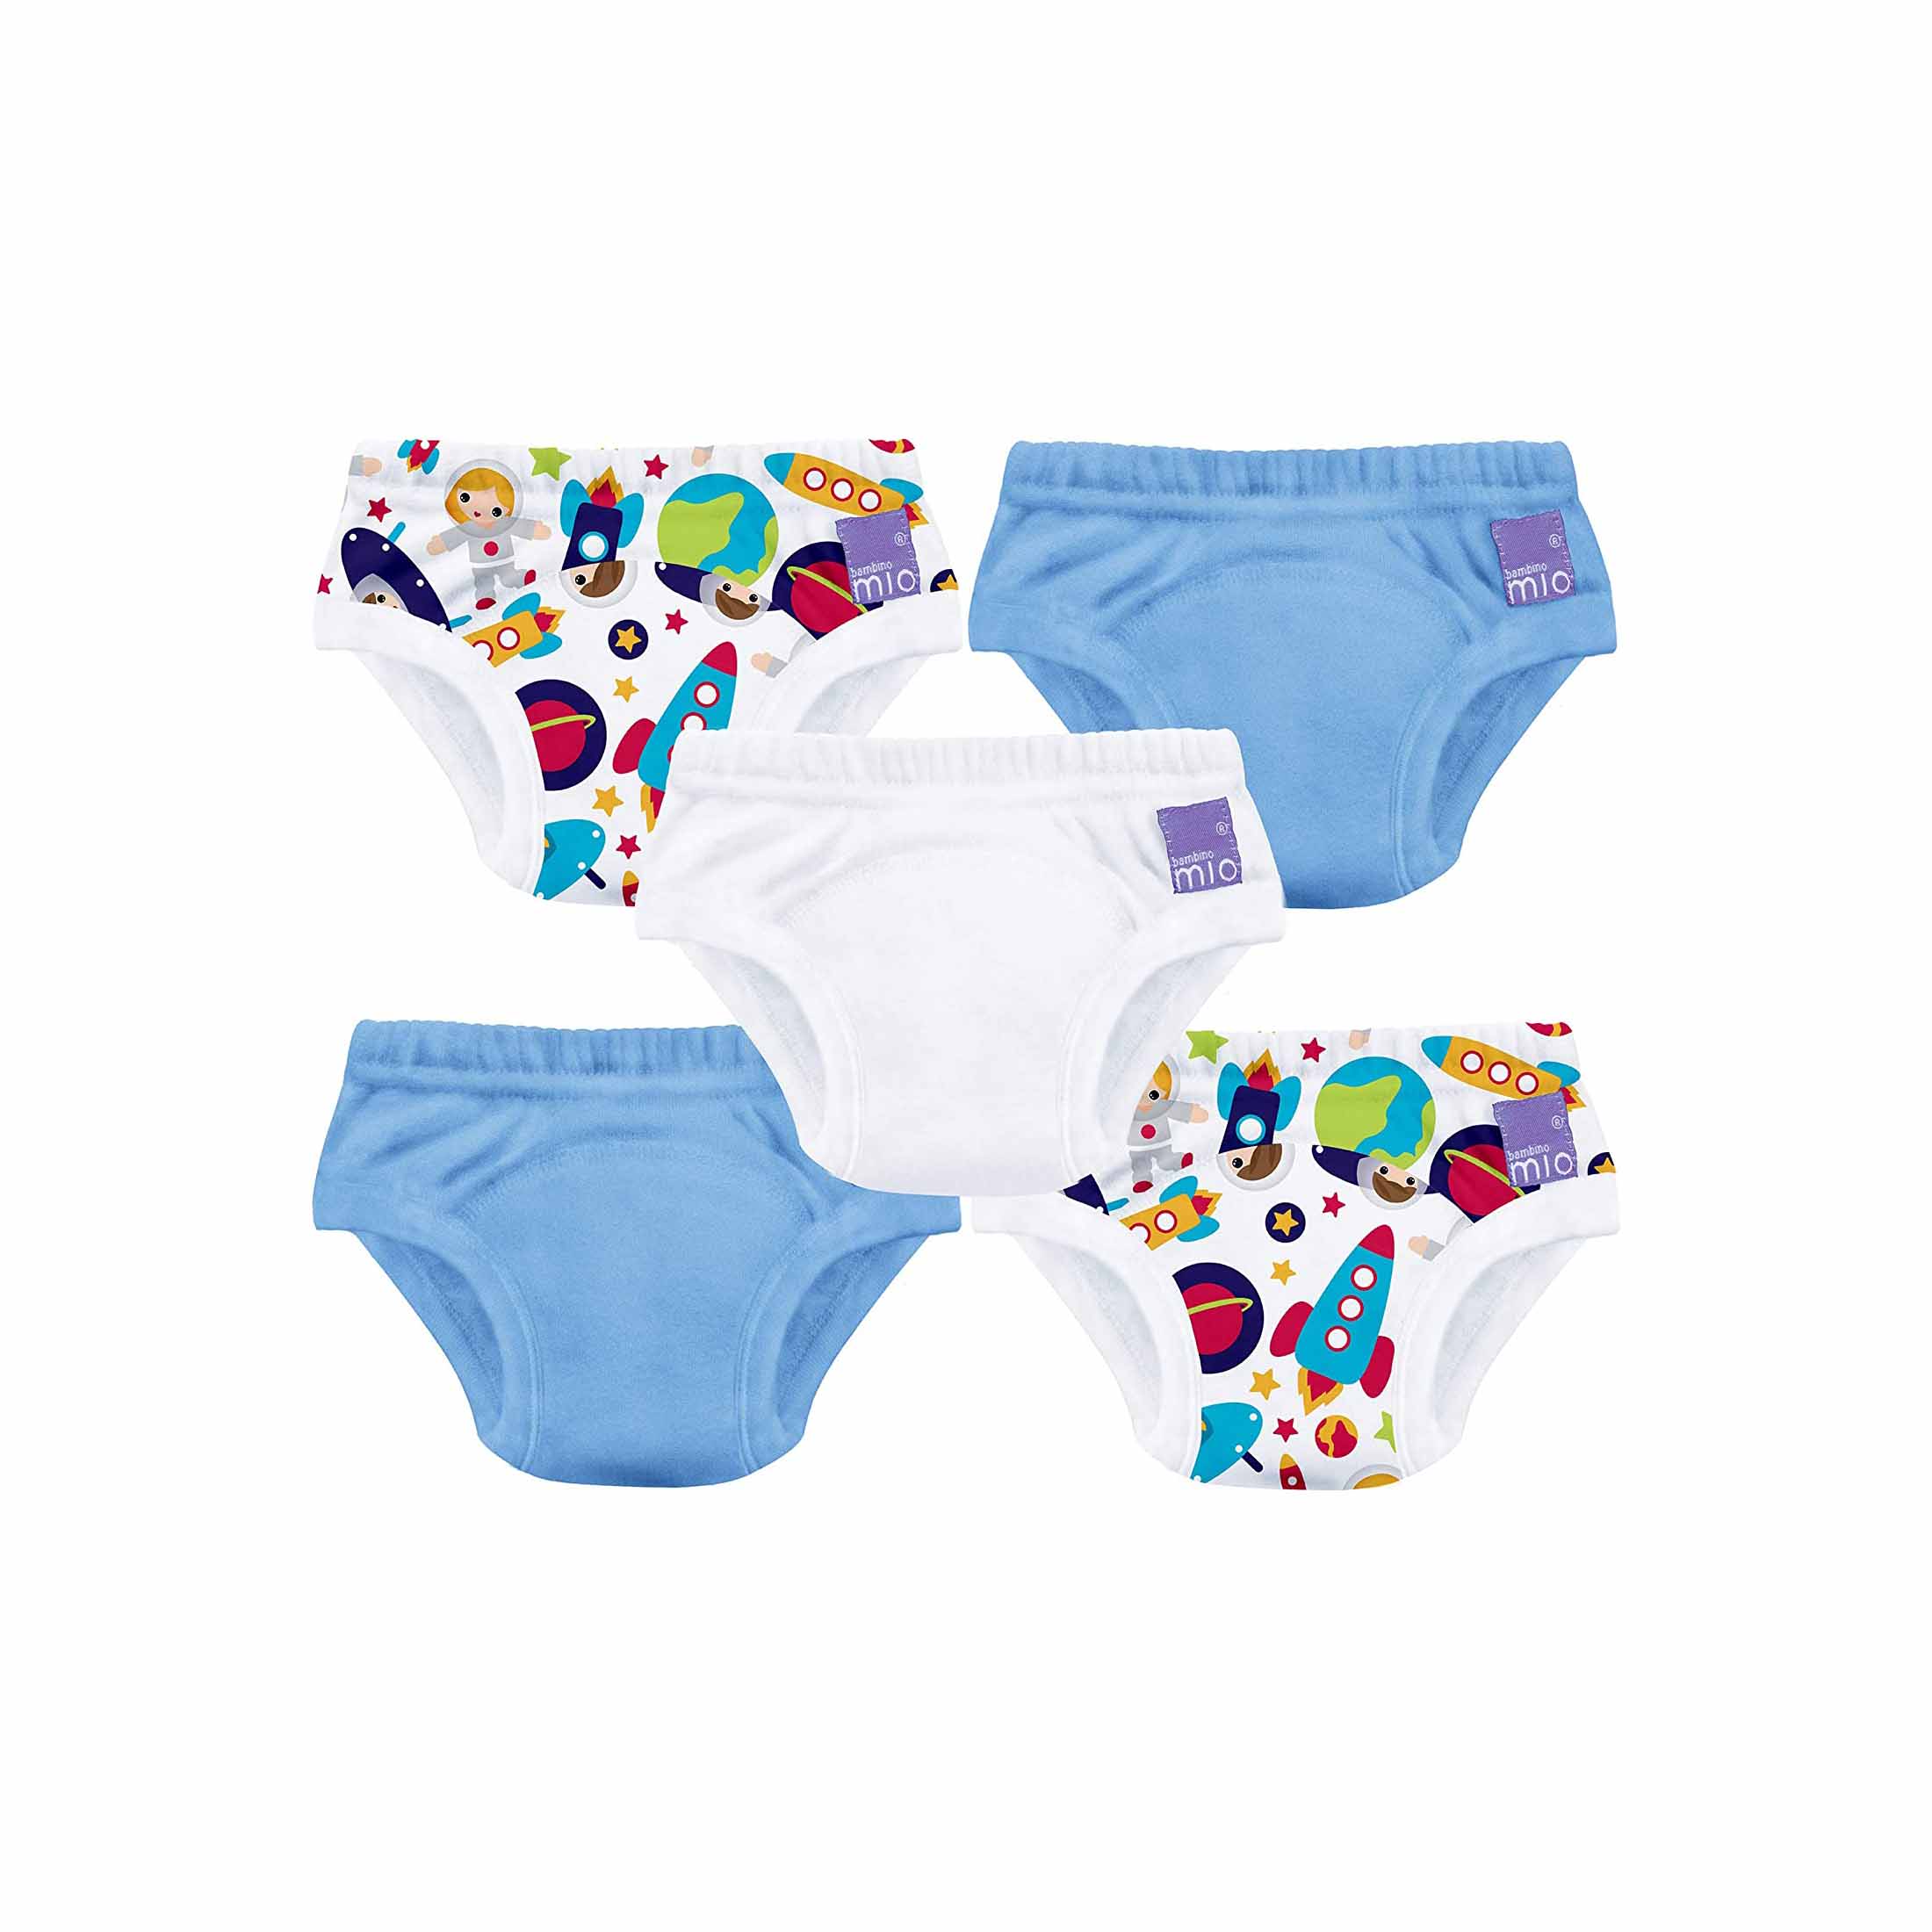 Rascal  Friends  Rascal  Friends premium nappies and nappy pants have  been flying off the shelves since arriving in the UK  Available  exclusively at Tesco make sure to get